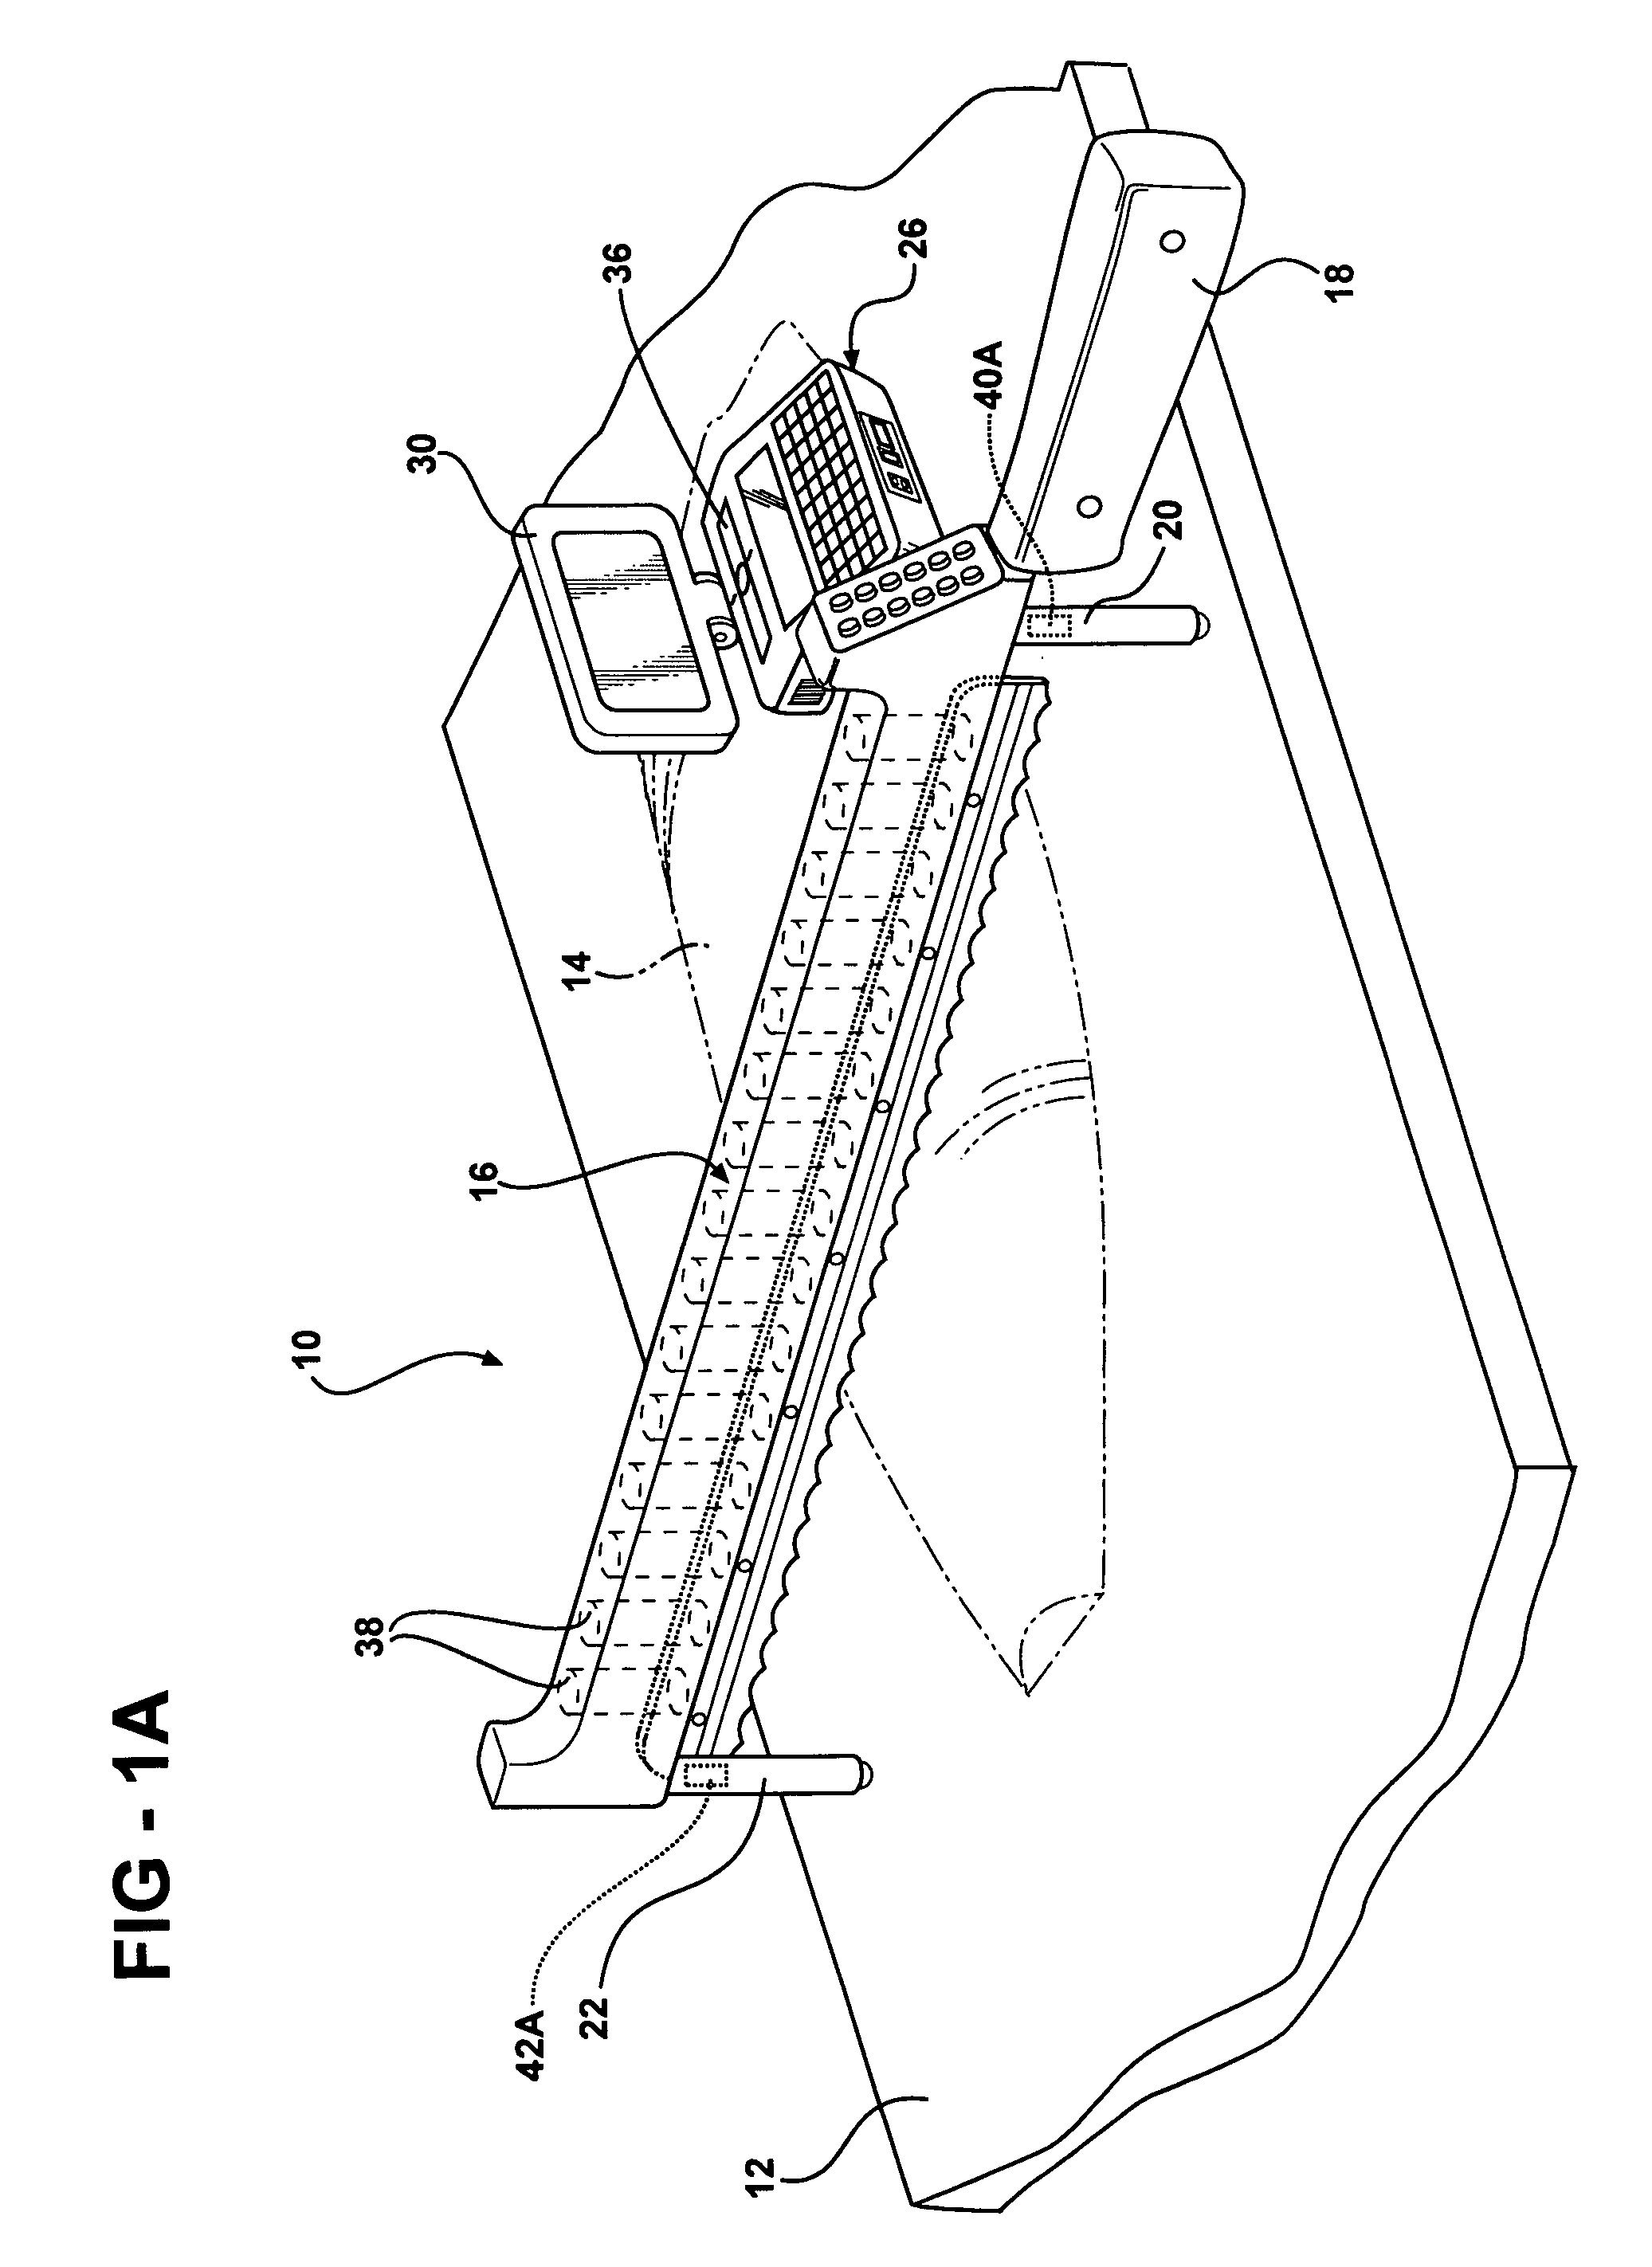 Apparatus and method for producing a numeric display corresponding to the volume of a selected segment of an item